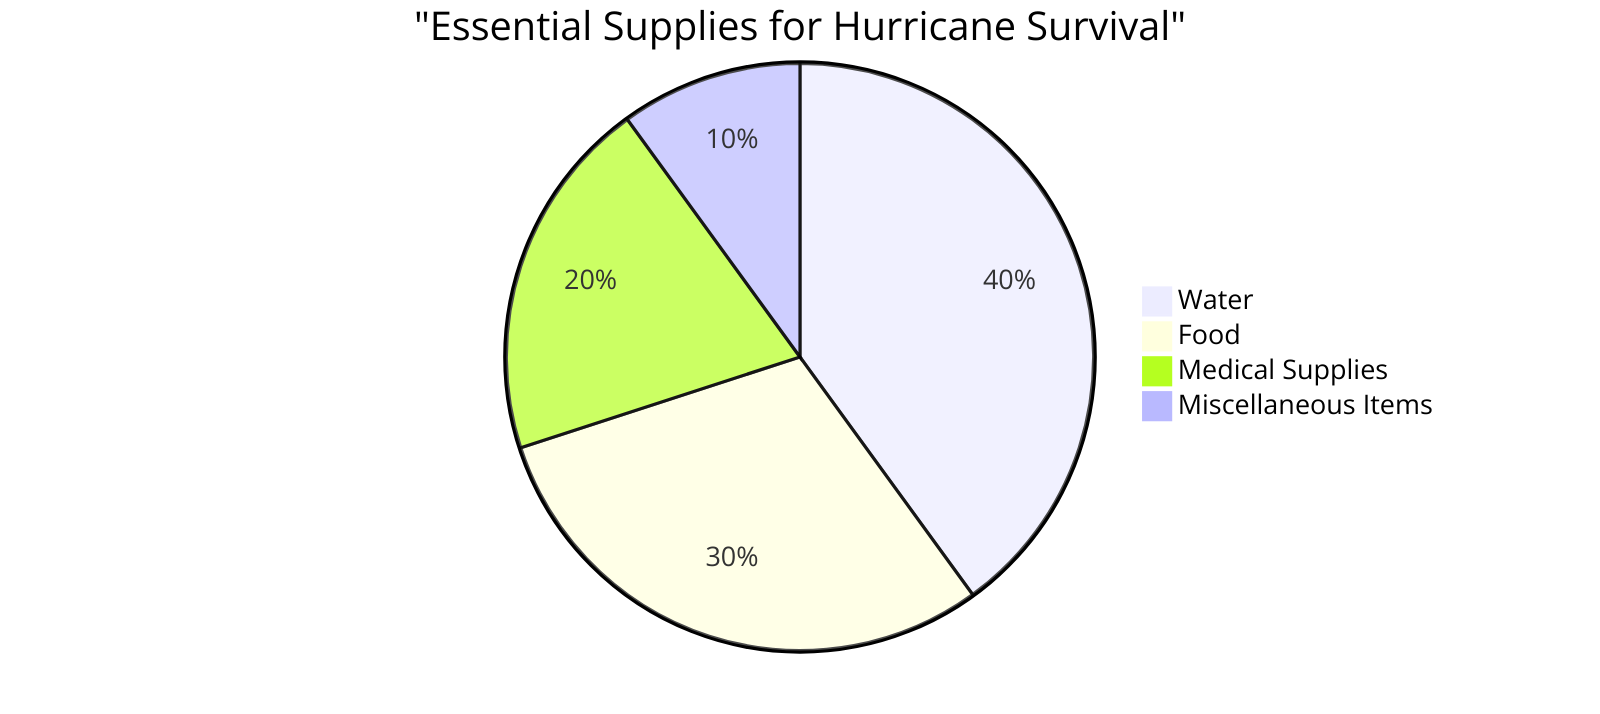 the breakdown of essential supplies needed for hurricane survival